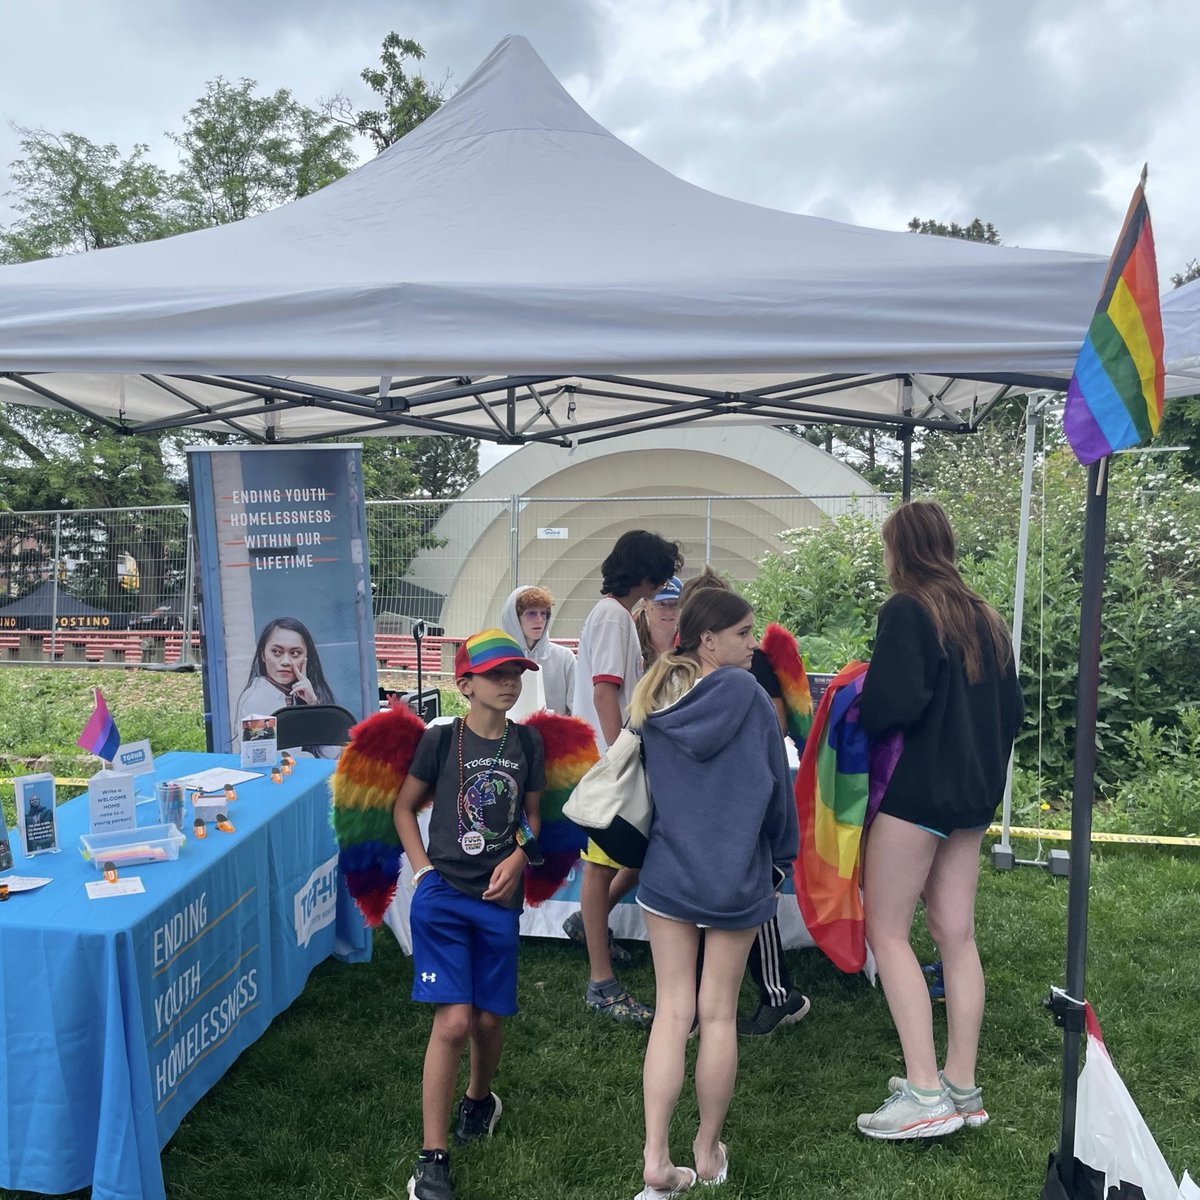 A HUGE thank you to everyone who came to our booth at the #pridefestival in Boulder this past weekend 🌈 Here at TGTHR we prioritize fostering a community where all of our youth feel safe and supported being themselves ❤️🧡💛💚💙💜